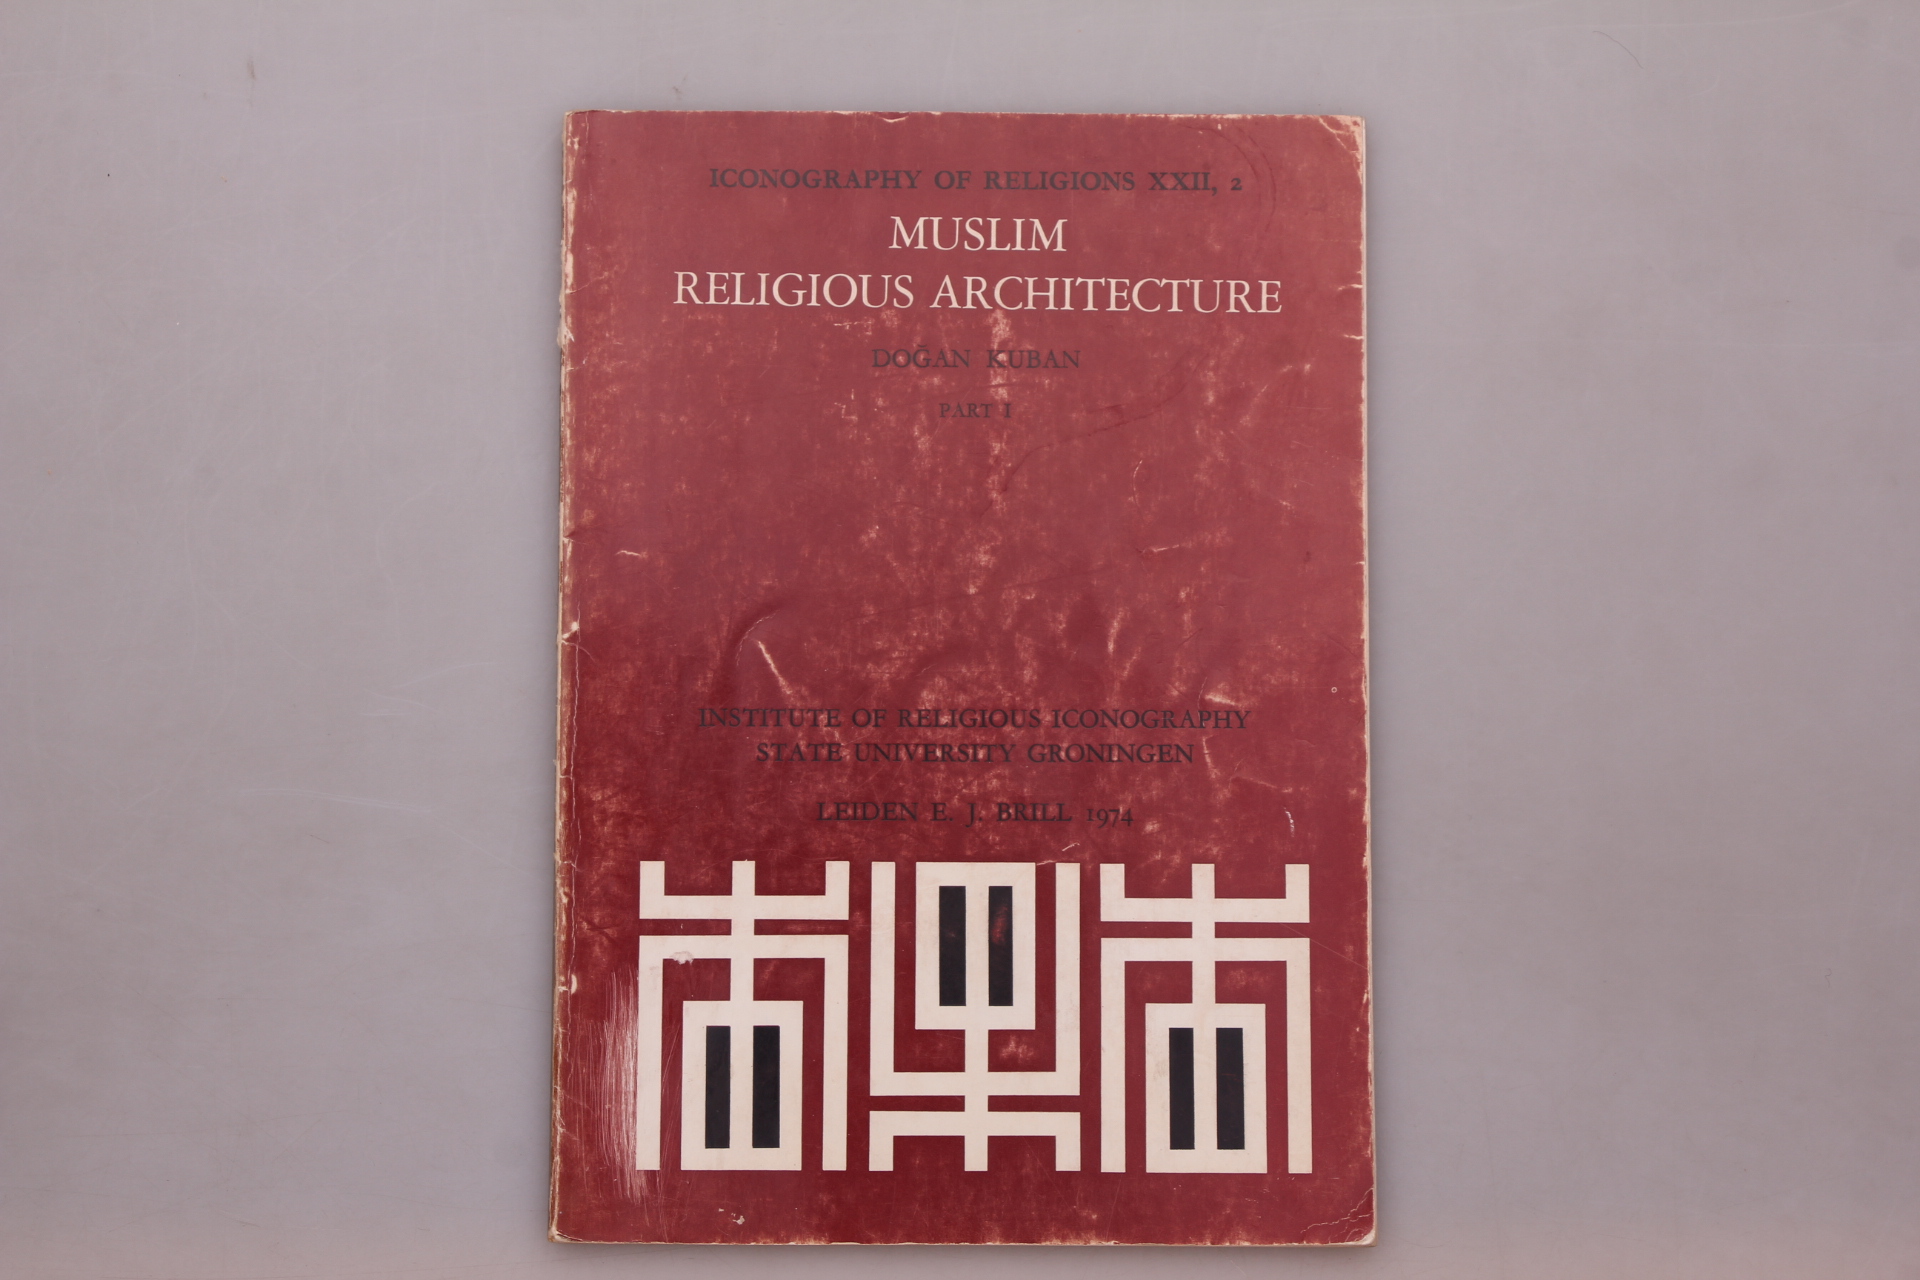 MUSLIM RELIGIOUS ARCHITECTURE: THE MOSQUE AND IT S EARLY DEVELOPMENT. - Kuban, Dogan; [Hrsg.]: Insitute of Religious Iconography State University Groeningen